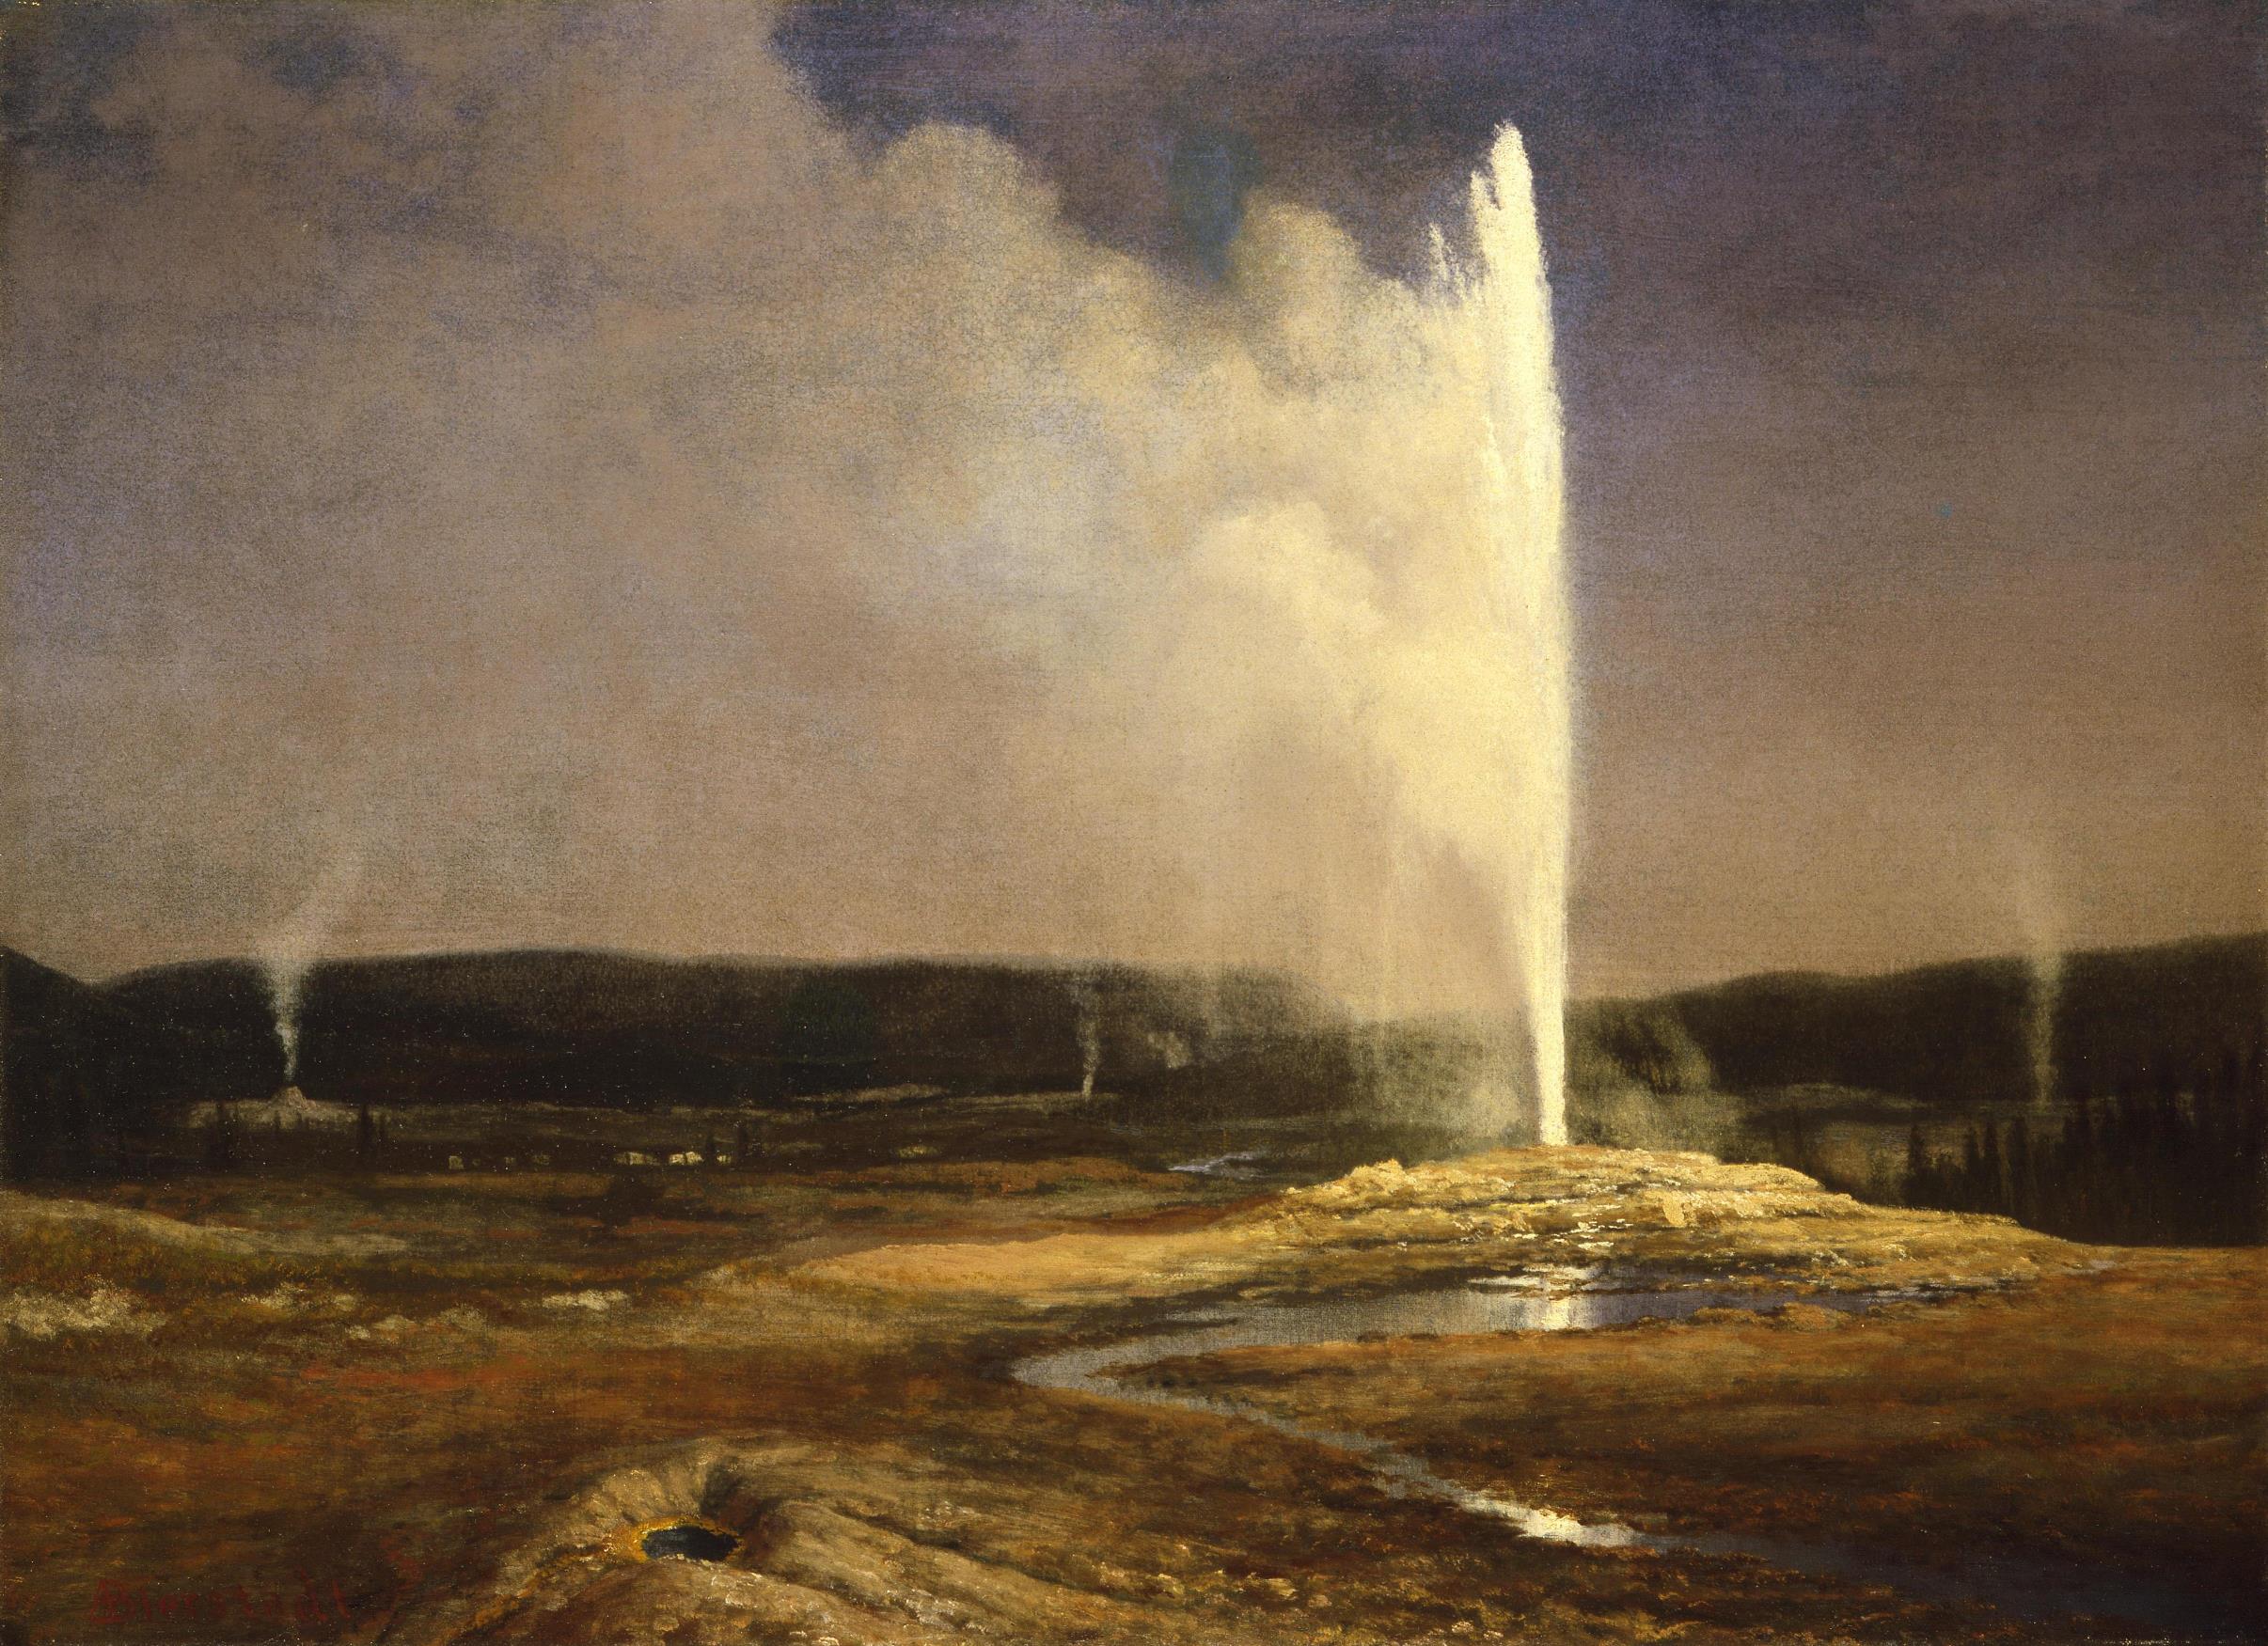 Albert Bierstadt's (1830-1902) "Geysers in Yellowstone," 1881. Buffalo Bill Center of the West, Cody, Wyoming, USA. Gift of Townsend B. Martin. 4.77